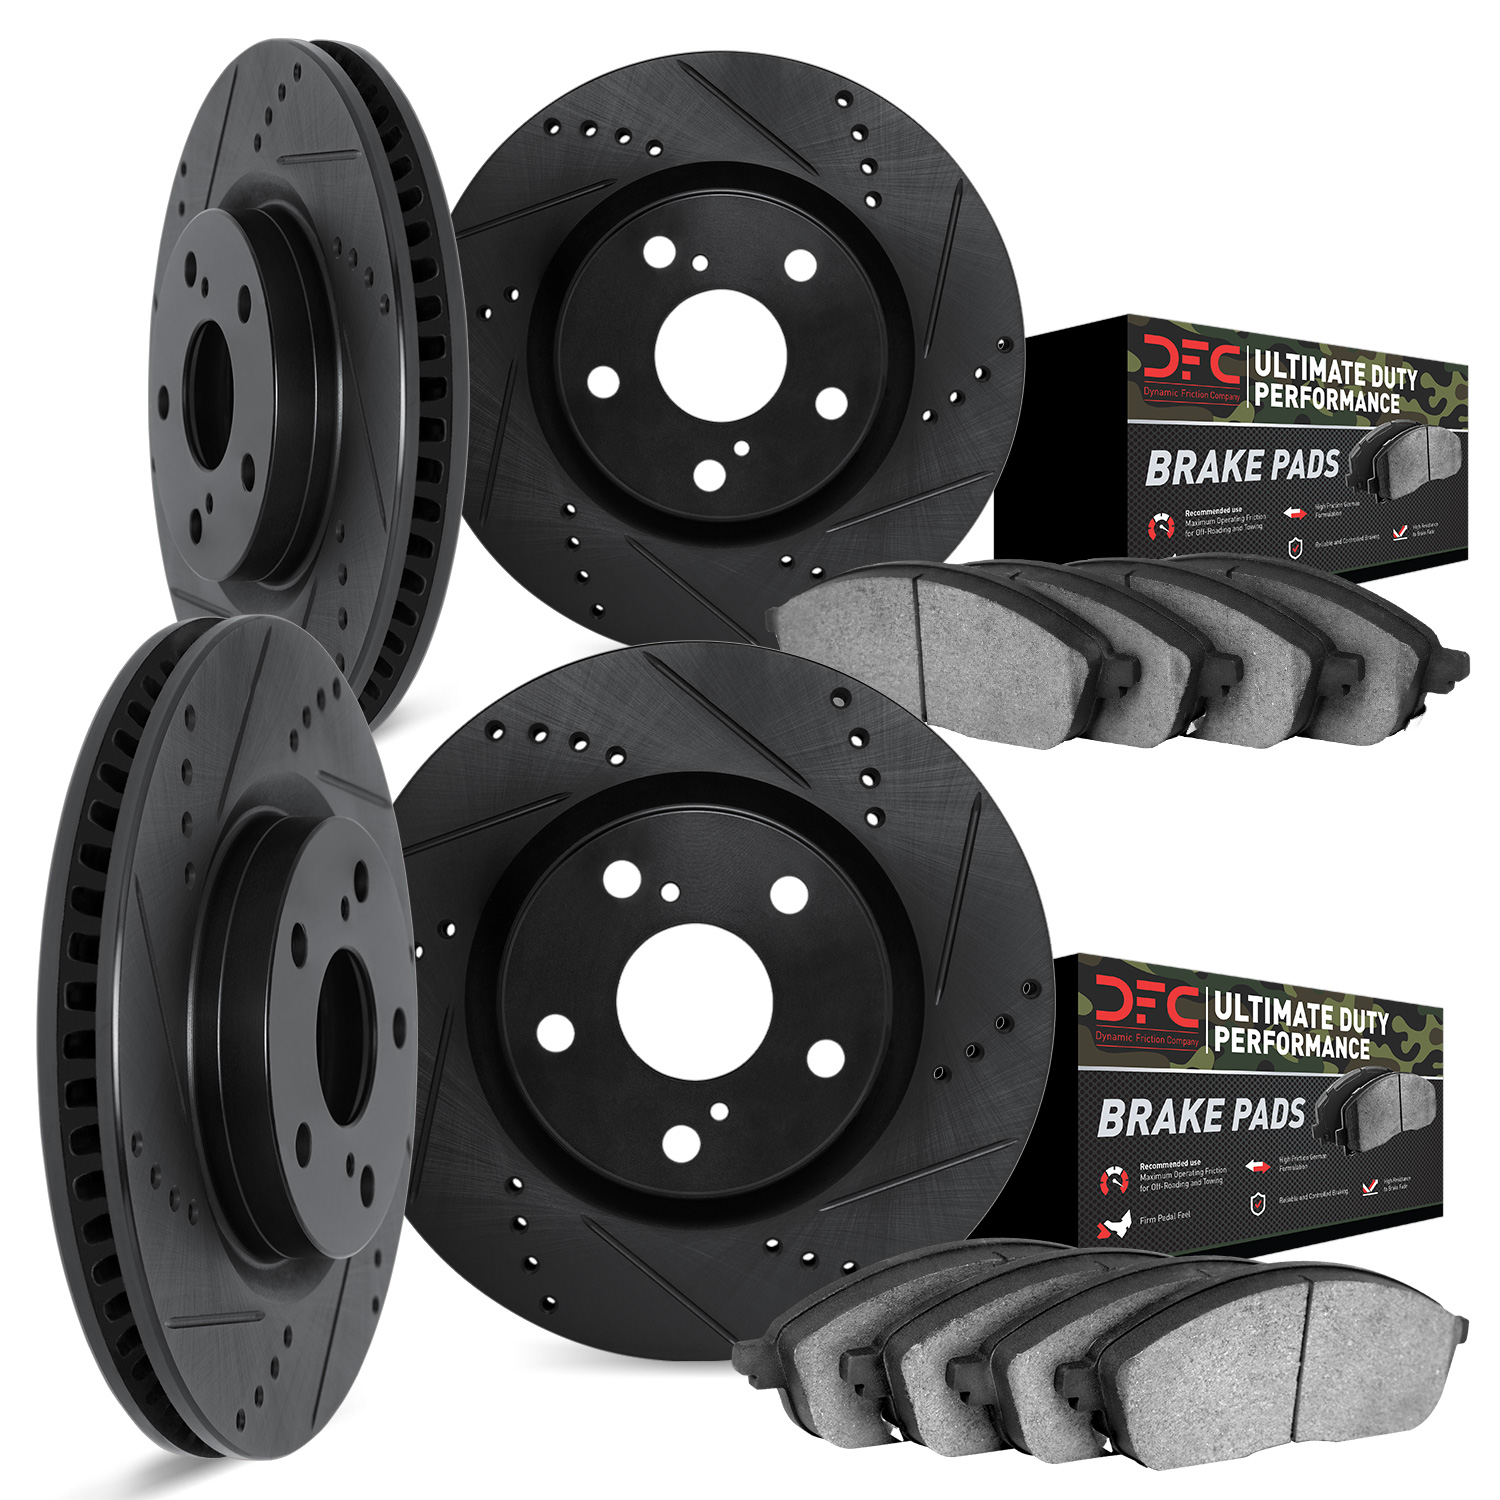 8404-26001 Drilled/Slotted Brake Rotors with Ultimate-Duty Brake Pads Kit [Black], 2012-2013 Tesla, Position: Front and Rear